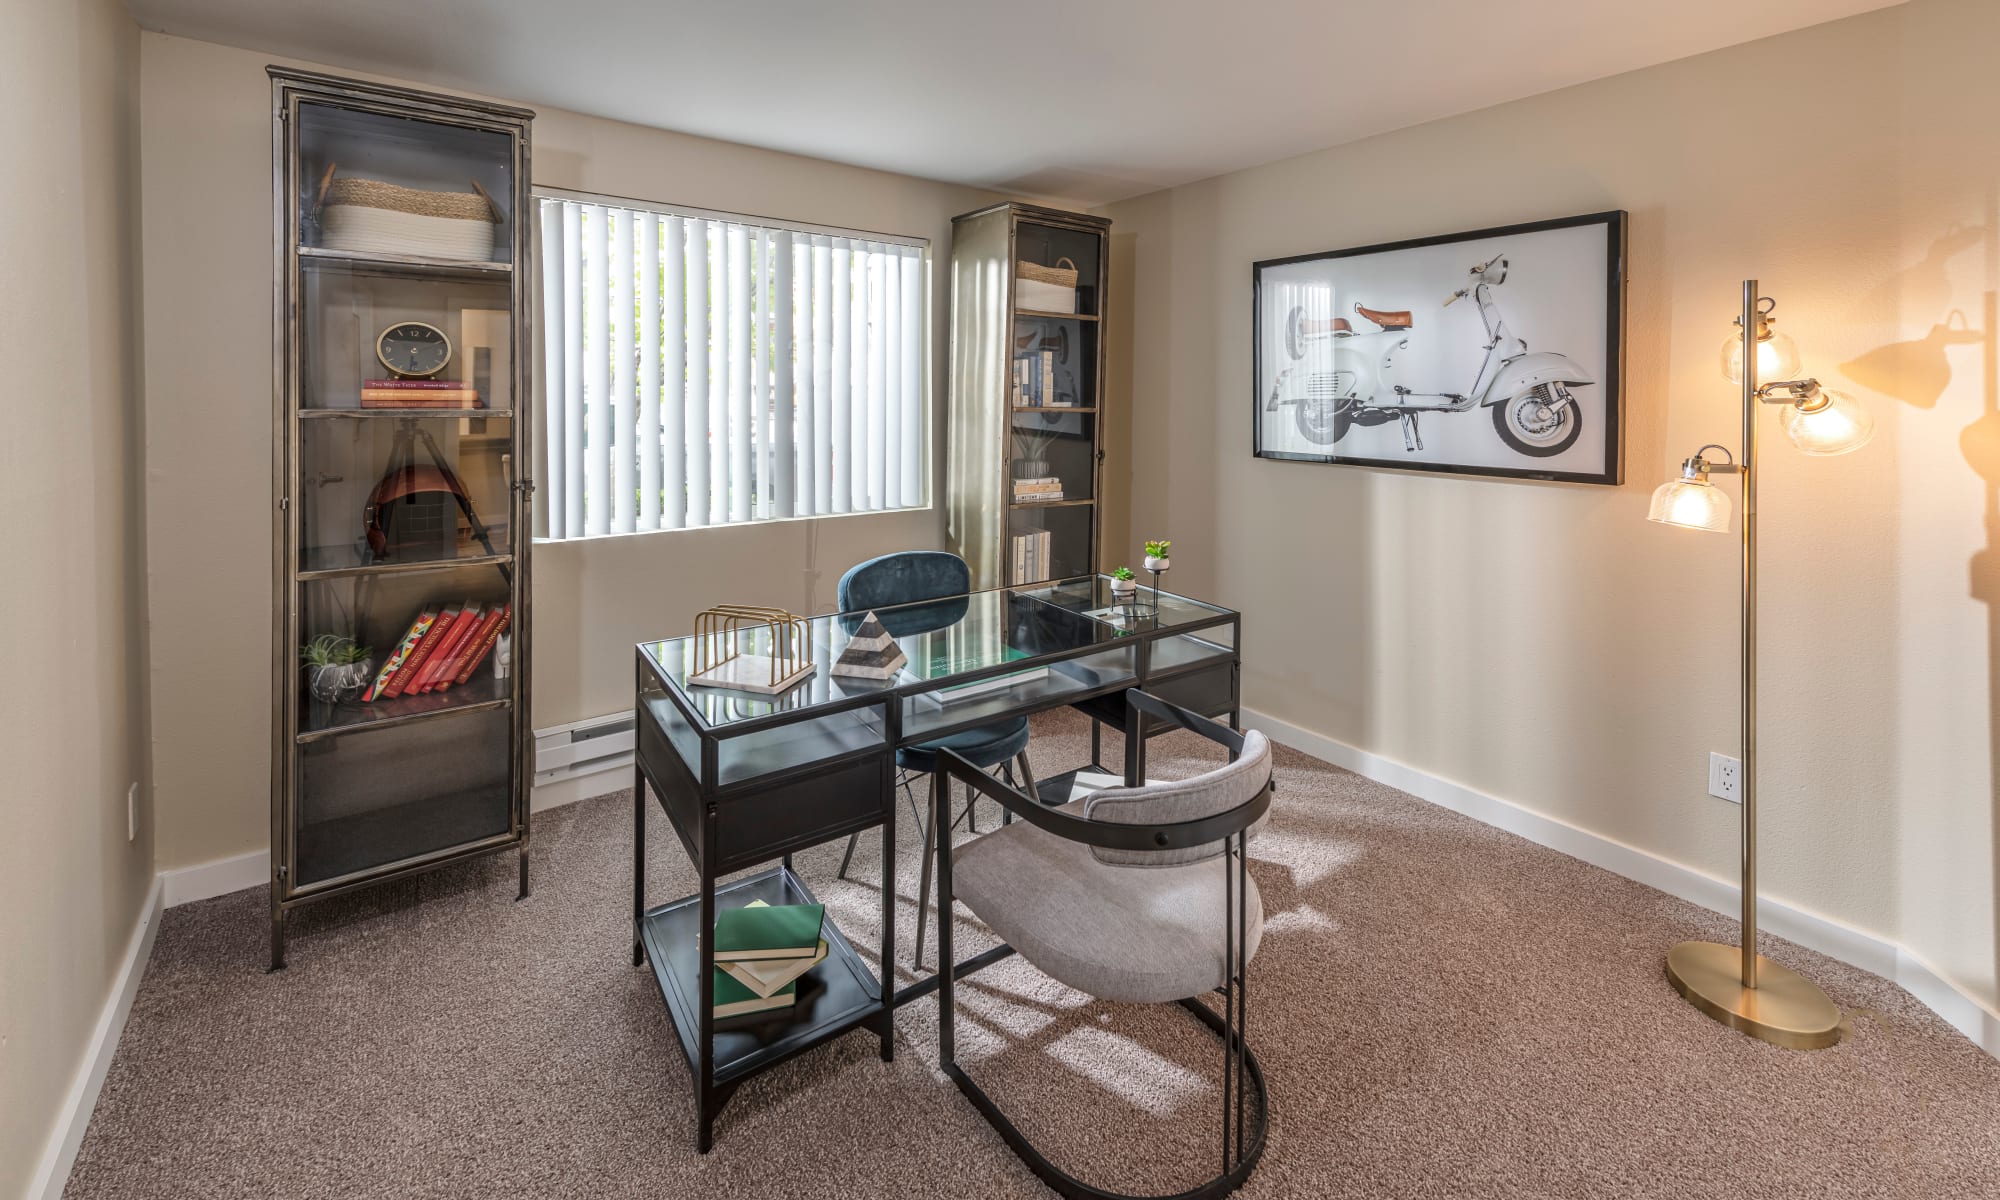 Map and directions to Redmond Place Apartments in Redmond, Washington